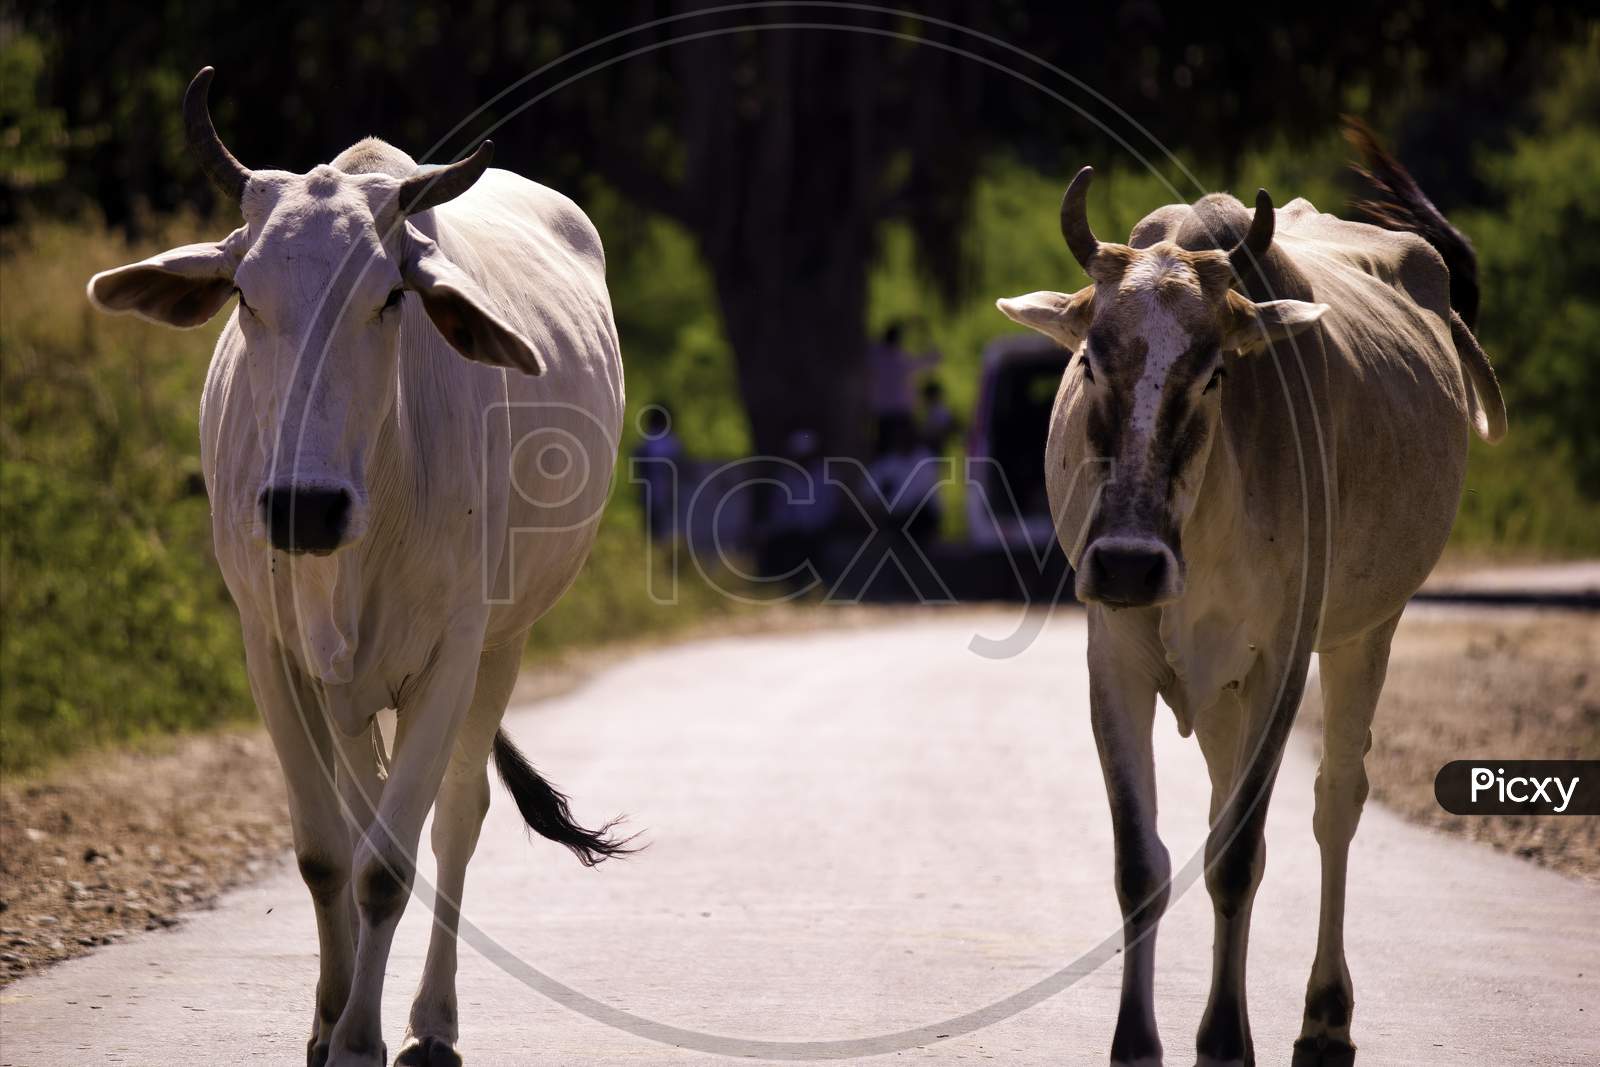 Two Cows With Horns Walking On A Street Of Rajasthan, India